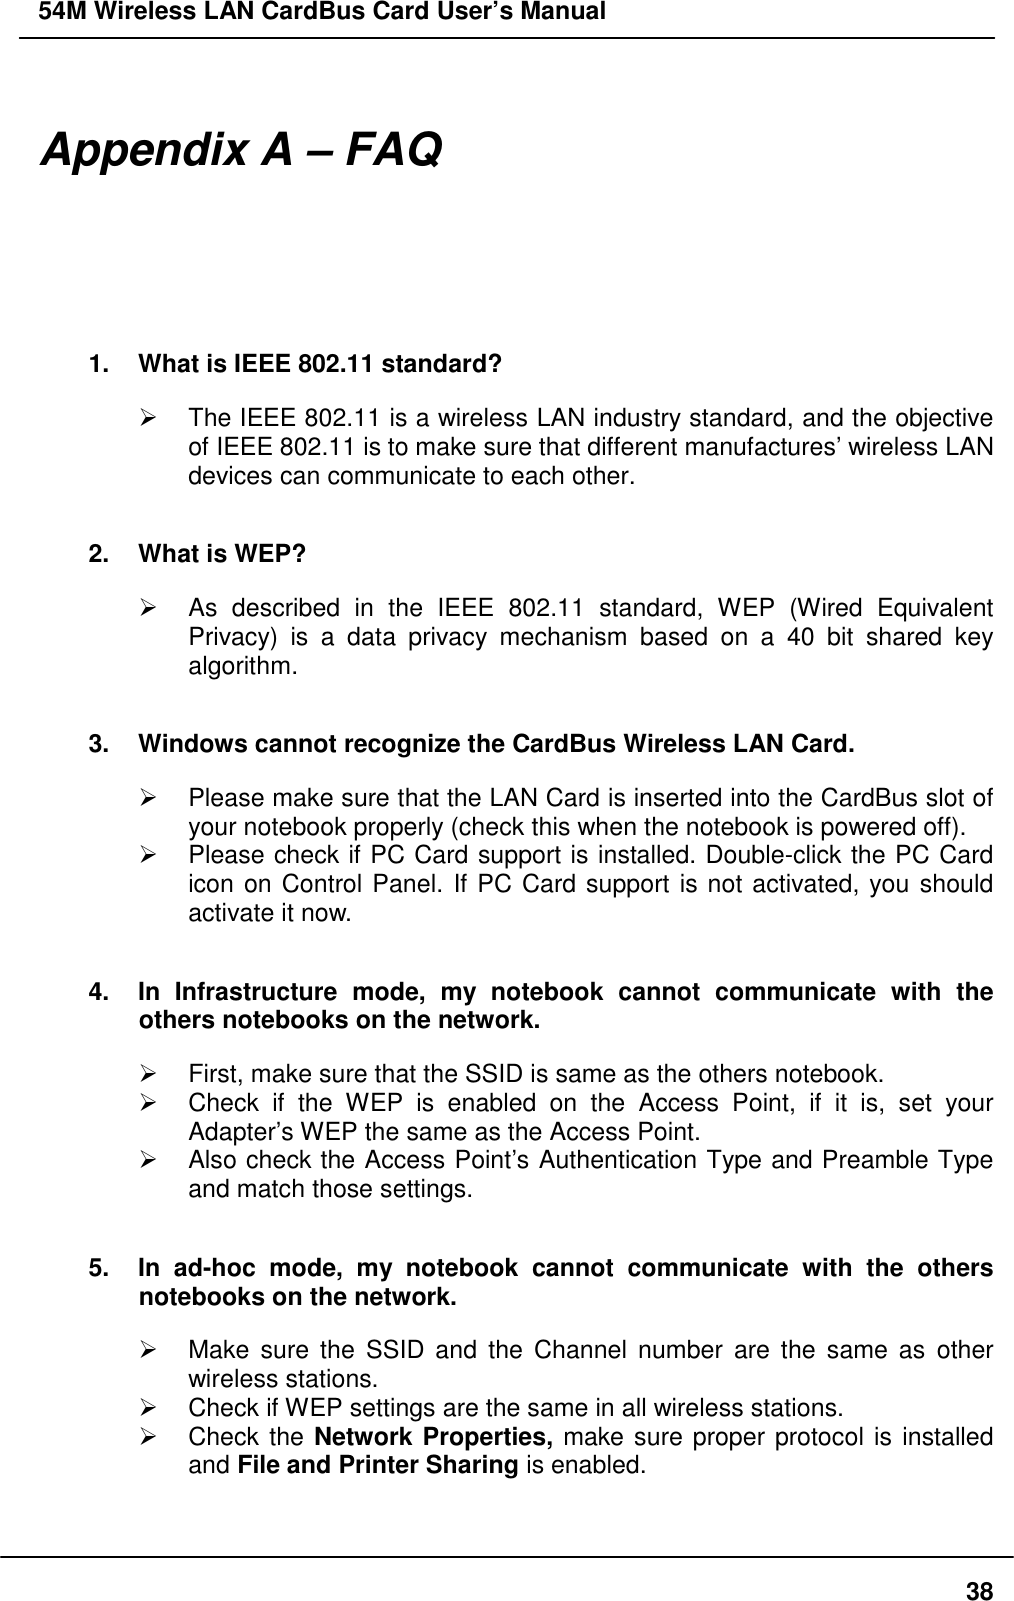 54M Wireless LAN CardBus Card User’s Manual38Appendix A – FAQ1.  What is IEEE 802.11 standard?¾  The IEEE 802.11 is a wireless LAN industry standard, and the objectiveof IEEE 802.11 is to make sure that different manufactures’ wireless LANdevices can communicate to each other.2.  What is WEP?¾  As described in the IEEE 802.11 standard, WEP (Wired EquivalentPrivacy) is a data privacy mechanism based on a 40 bit shared keyalgorithm.3.  Windows cannot recognize the CardBus Wireless LAN Card.¾  Please make sure that the LAN Card is inserted into the CardBus slot ofyour notebook properly (check this when the notebook is powered off).¾  Please check if PC Card support is installed. Double-click the PC Cardicon on Control Panel. If PC Card support is not activated, you shouldactivate it now.4.  In Infrastructure mode, my notebook cannot communicate with theothers notebooks on the network.¾  First, make sure that the SSID is same as the others notebook.¾  Check if the WEP is enabled on the Access Point, if it is, set yourAdapter’s WEP the same as the Access Point.¾  Also check the Access Point’s Authentication Type and Preamble Typeand match those settings.5.  In ad-hoc mode, my notebook cannot communicate with the othersnotebooks on the network.¾  Make sure the SSID and the Channel number are the same as otherwireless stations.¾  Check if WEP settings are the same in all wireless stations.¾ Check the Network Properties, make sure proper protocol is installedand File and Printer Sharing is enabled.